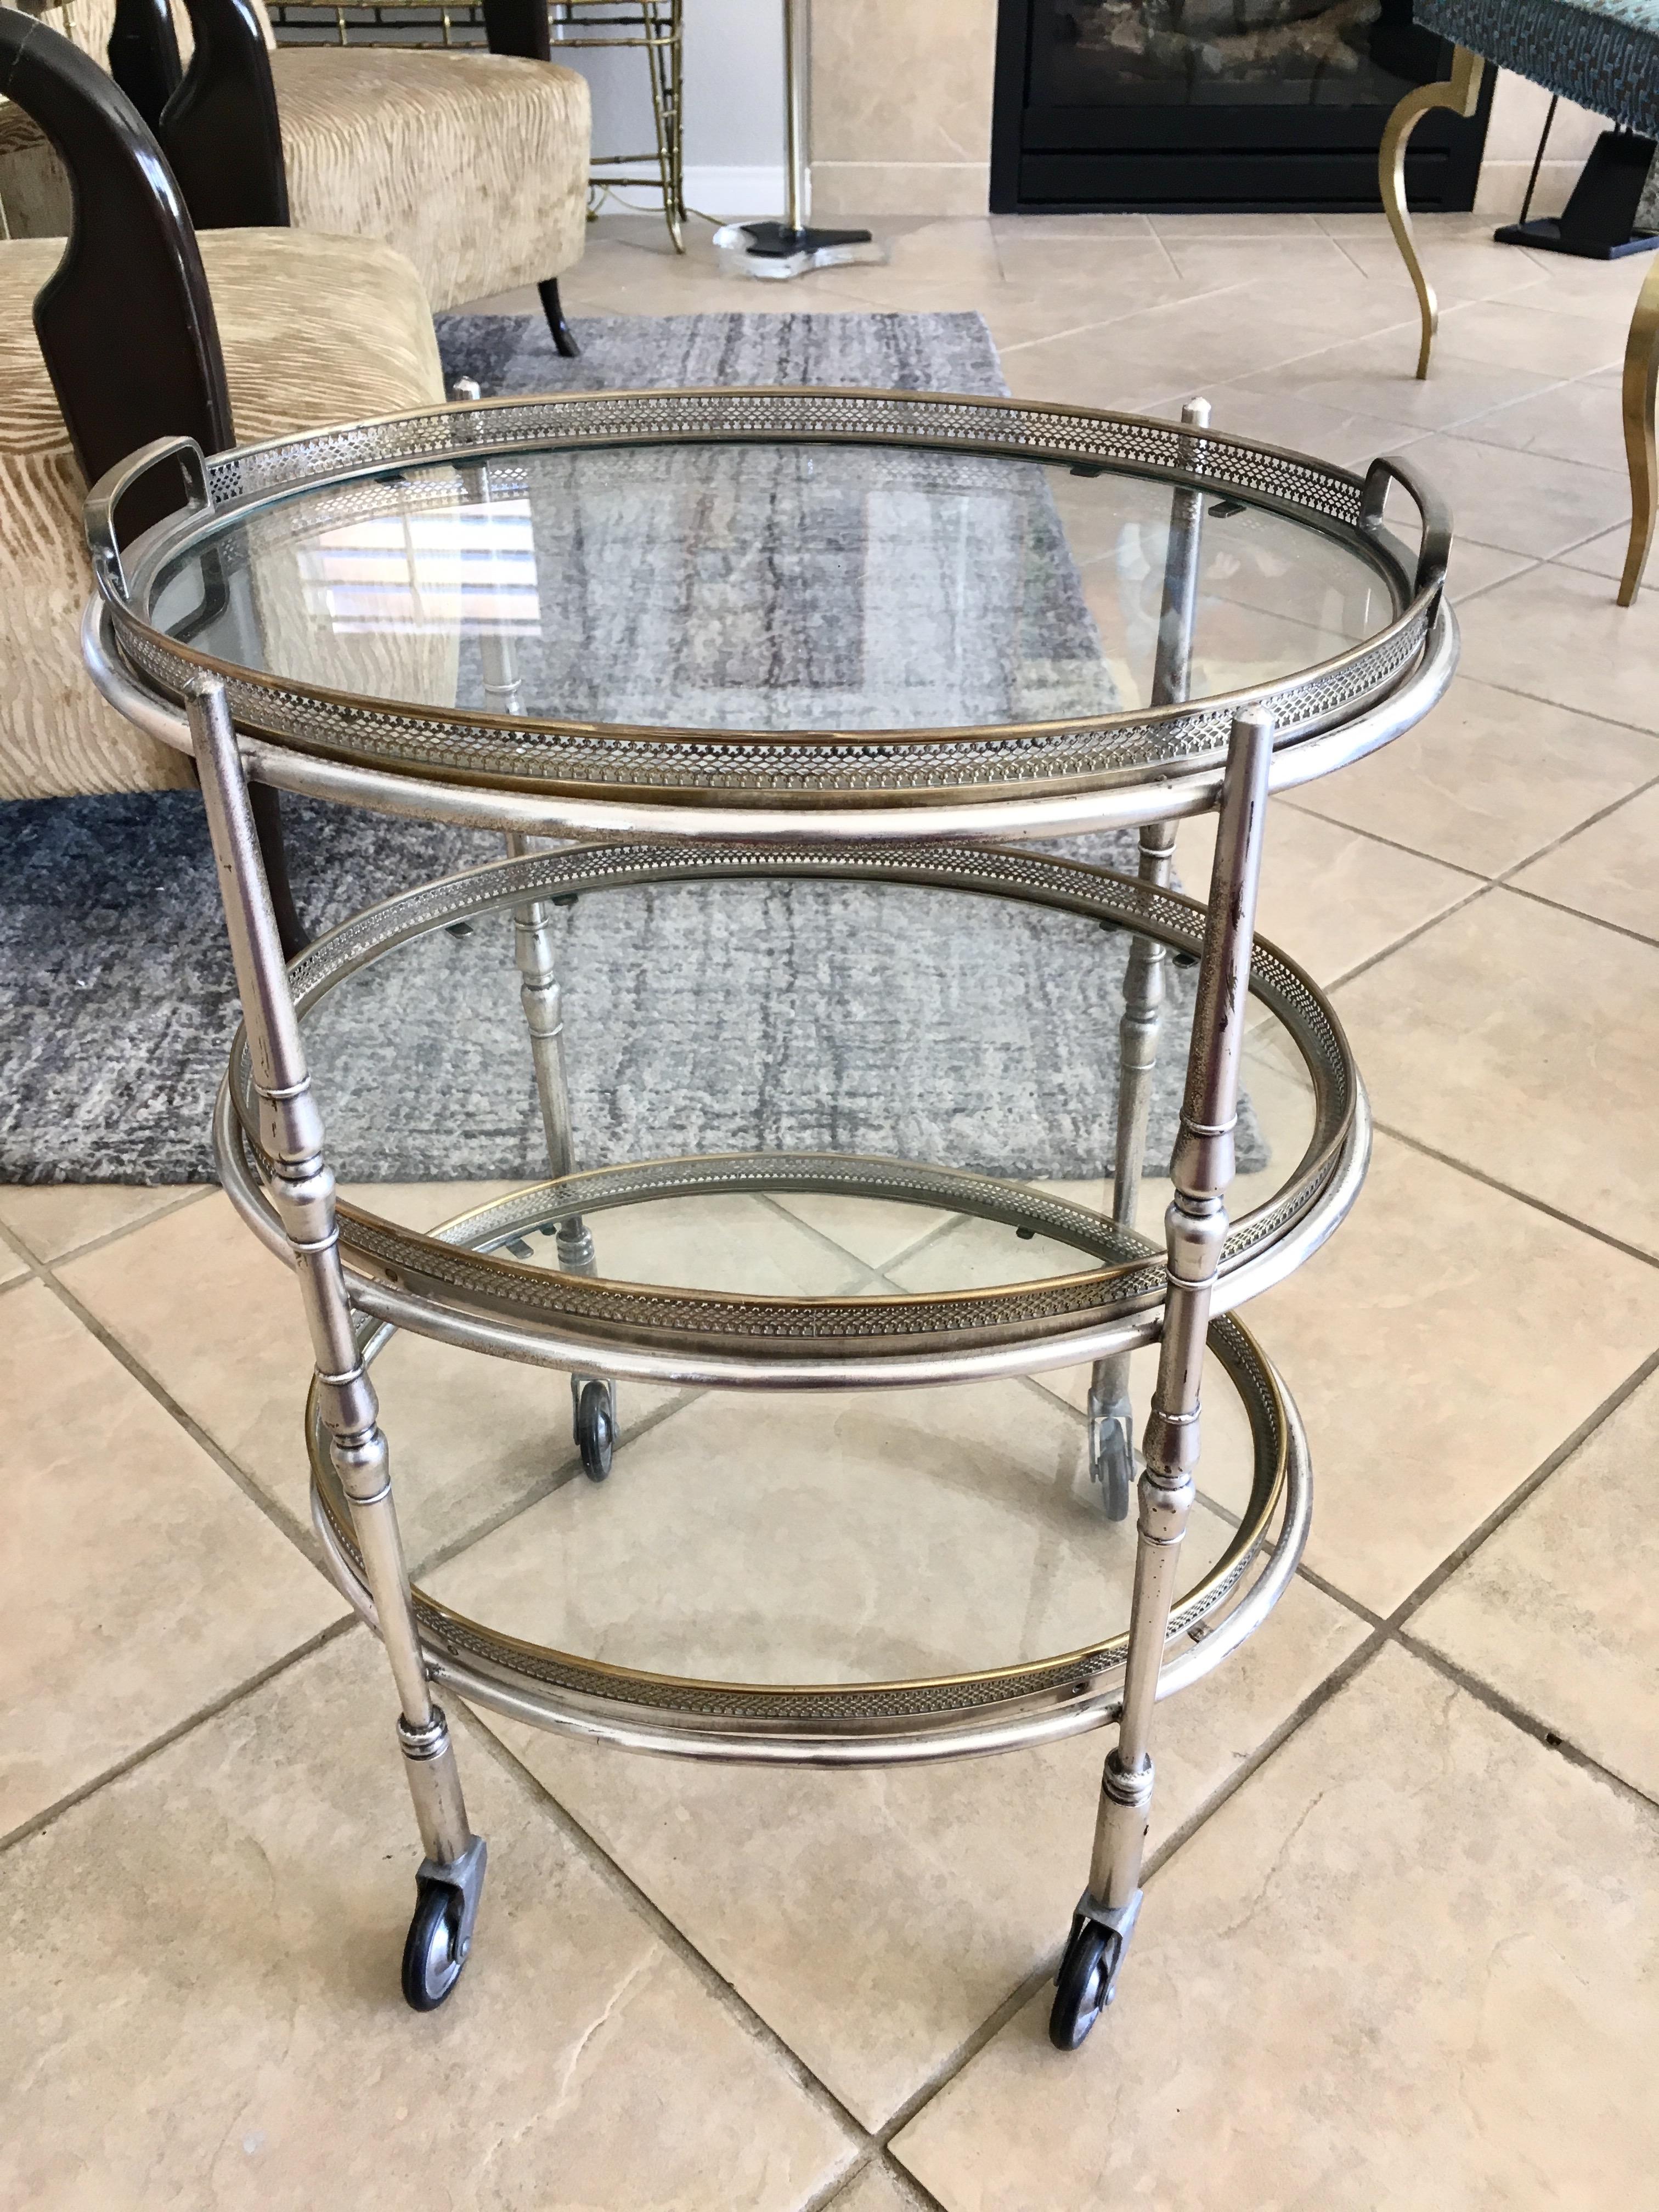 Diminutive French three-tier silver plate serving cart (tea/bar cart) with inset glass shelves. Refined details in the delicate gallery. Each tray is removable.